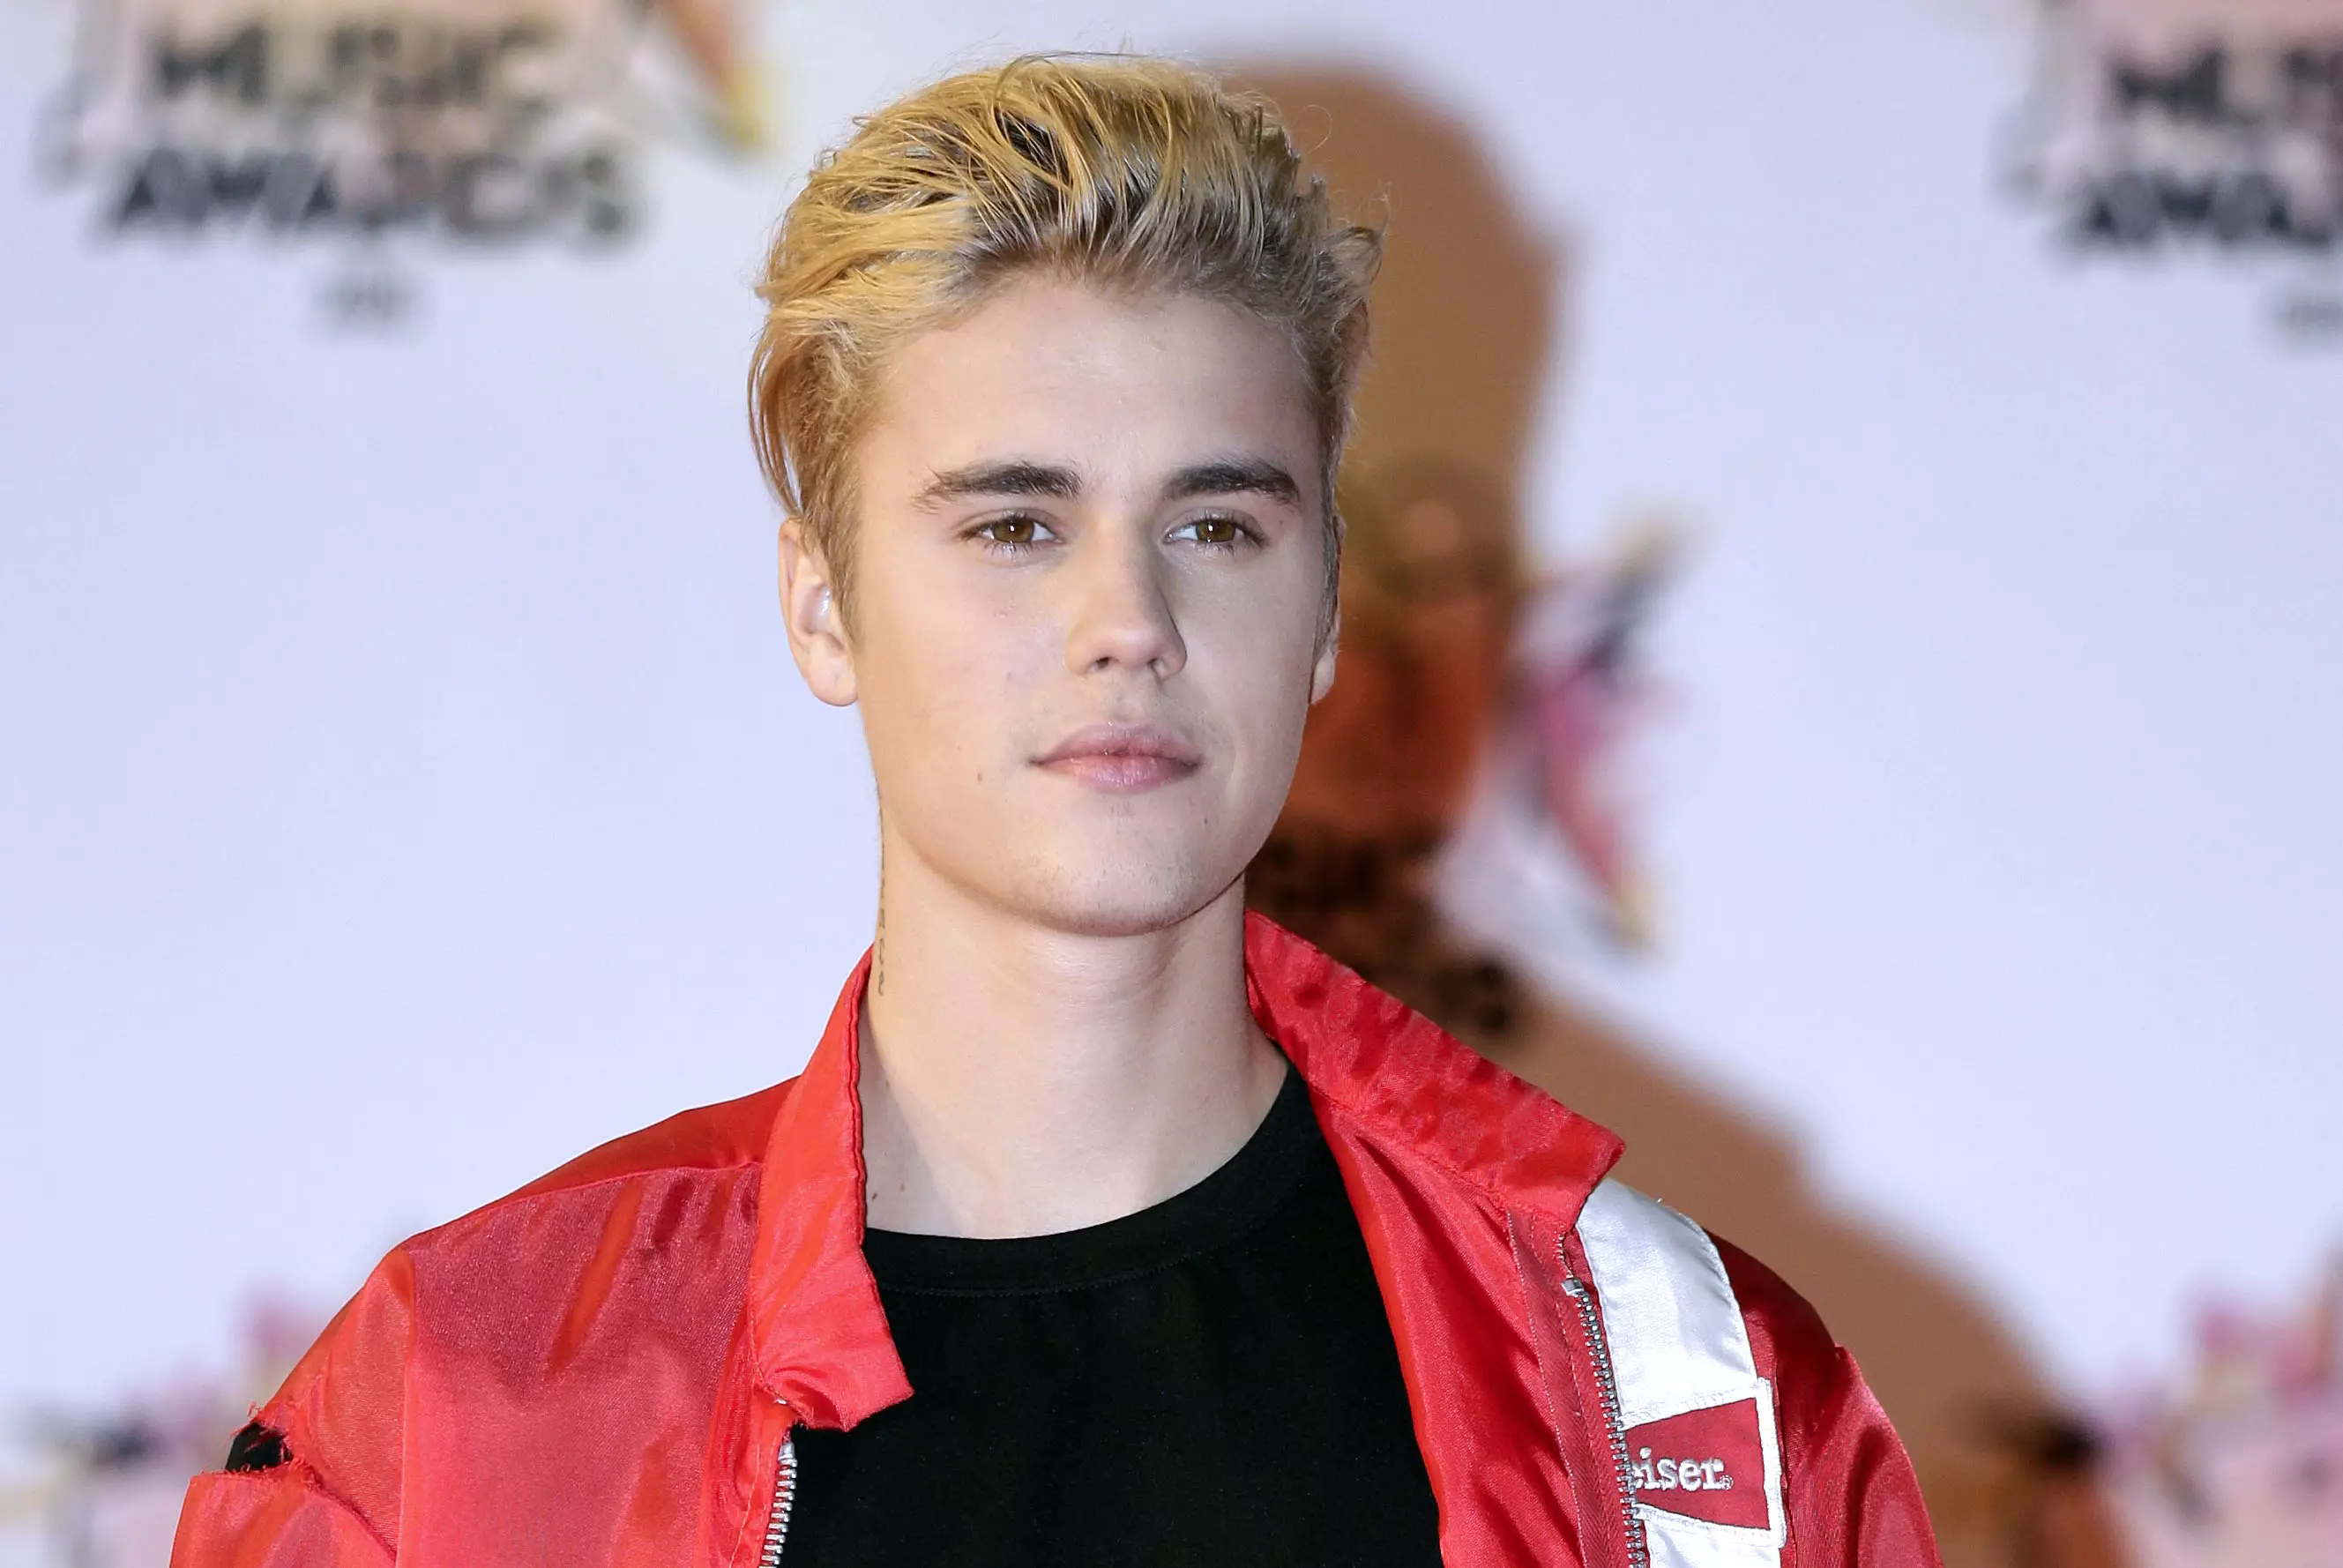 Justin Bieber 'Used Facebook To Get Girls To His Hotel Room'